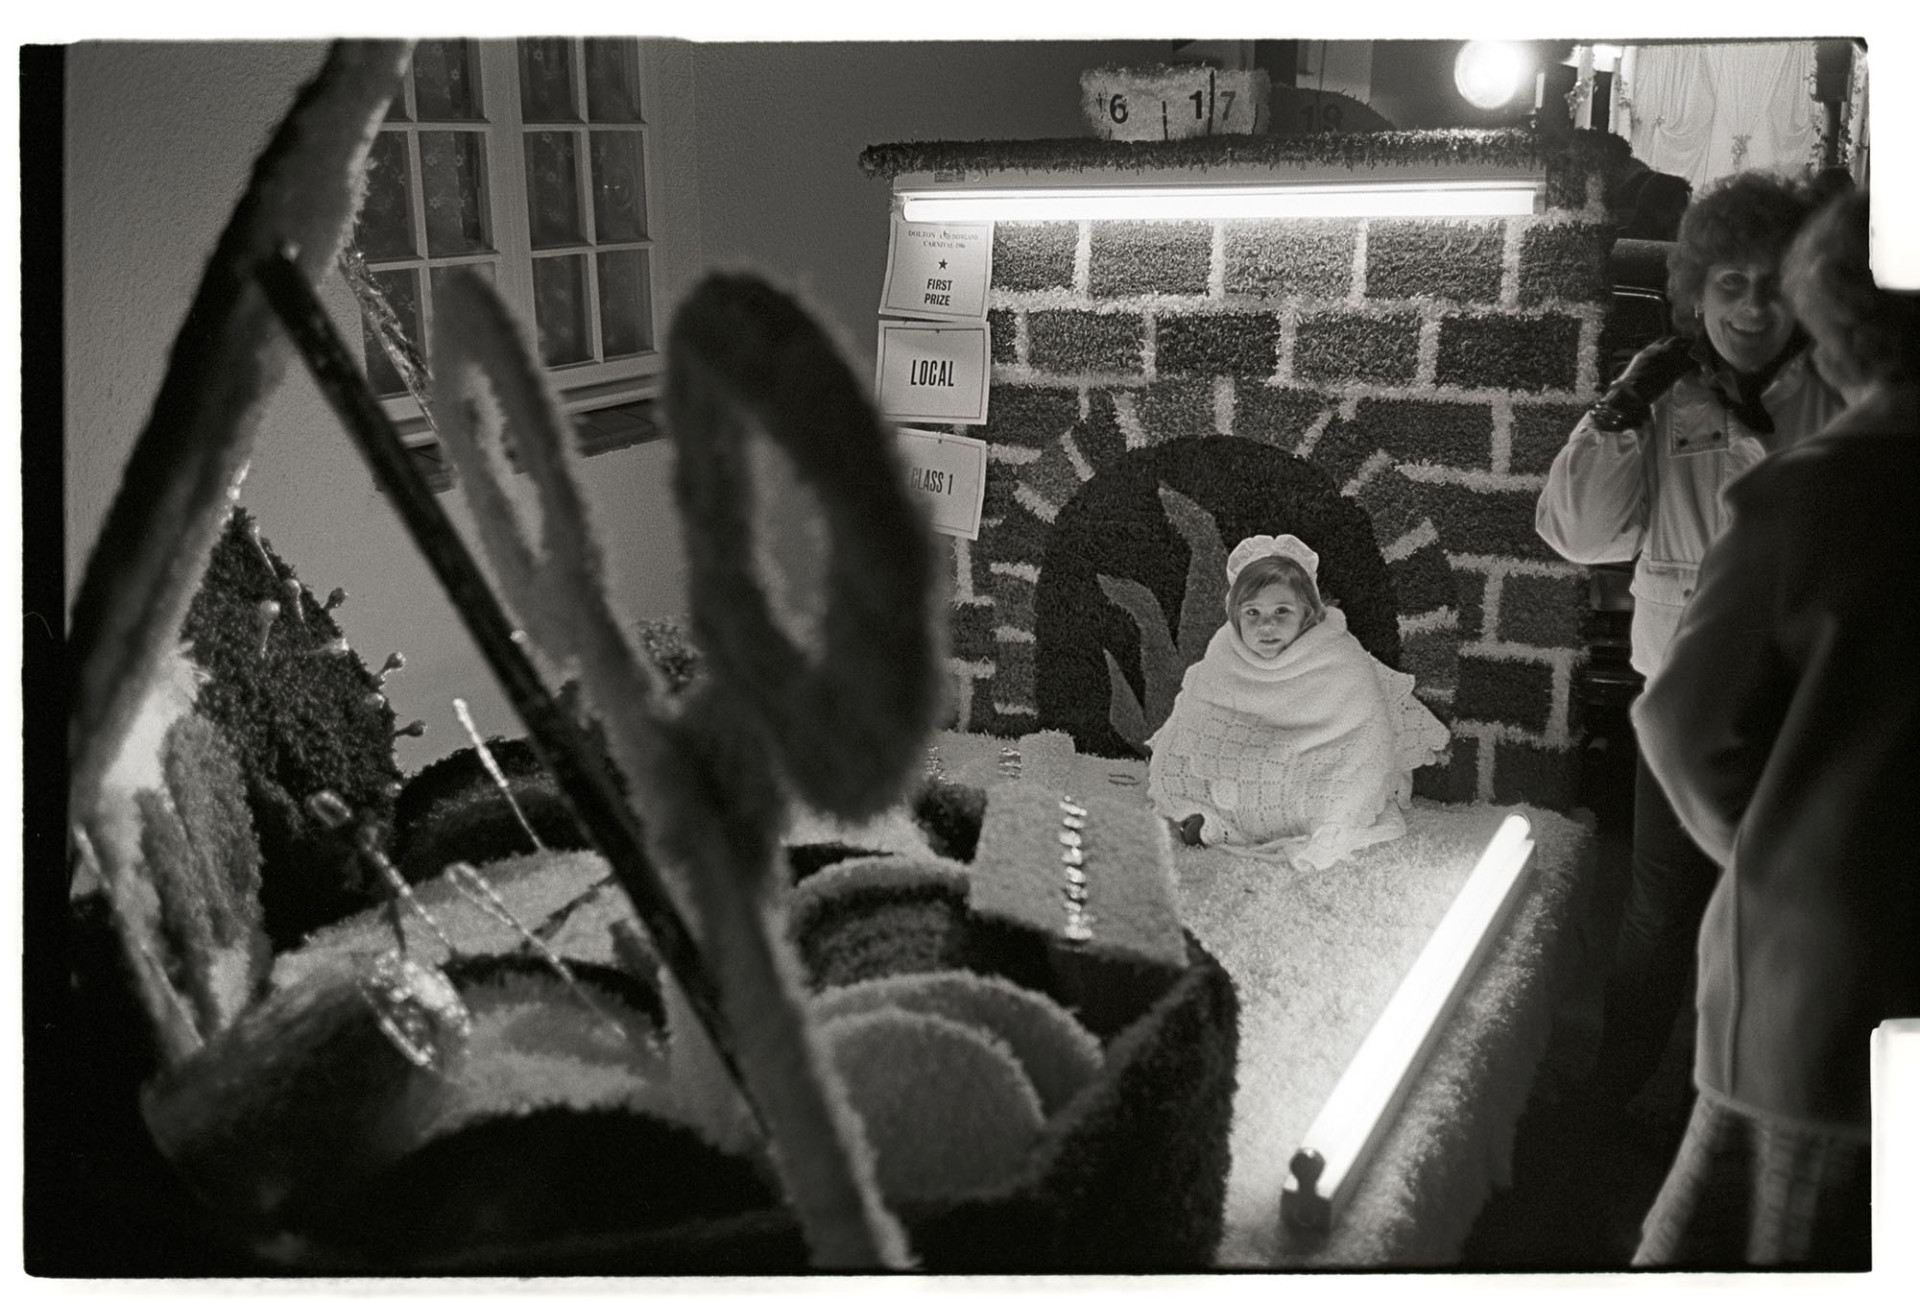 Carnival at night, child on lit float in fancy dress. 
[A child in fancy dress on a carnival float at Dolton carnival at night. The child is sat by the model of a fireplace. Two spectators are talking by the float.]